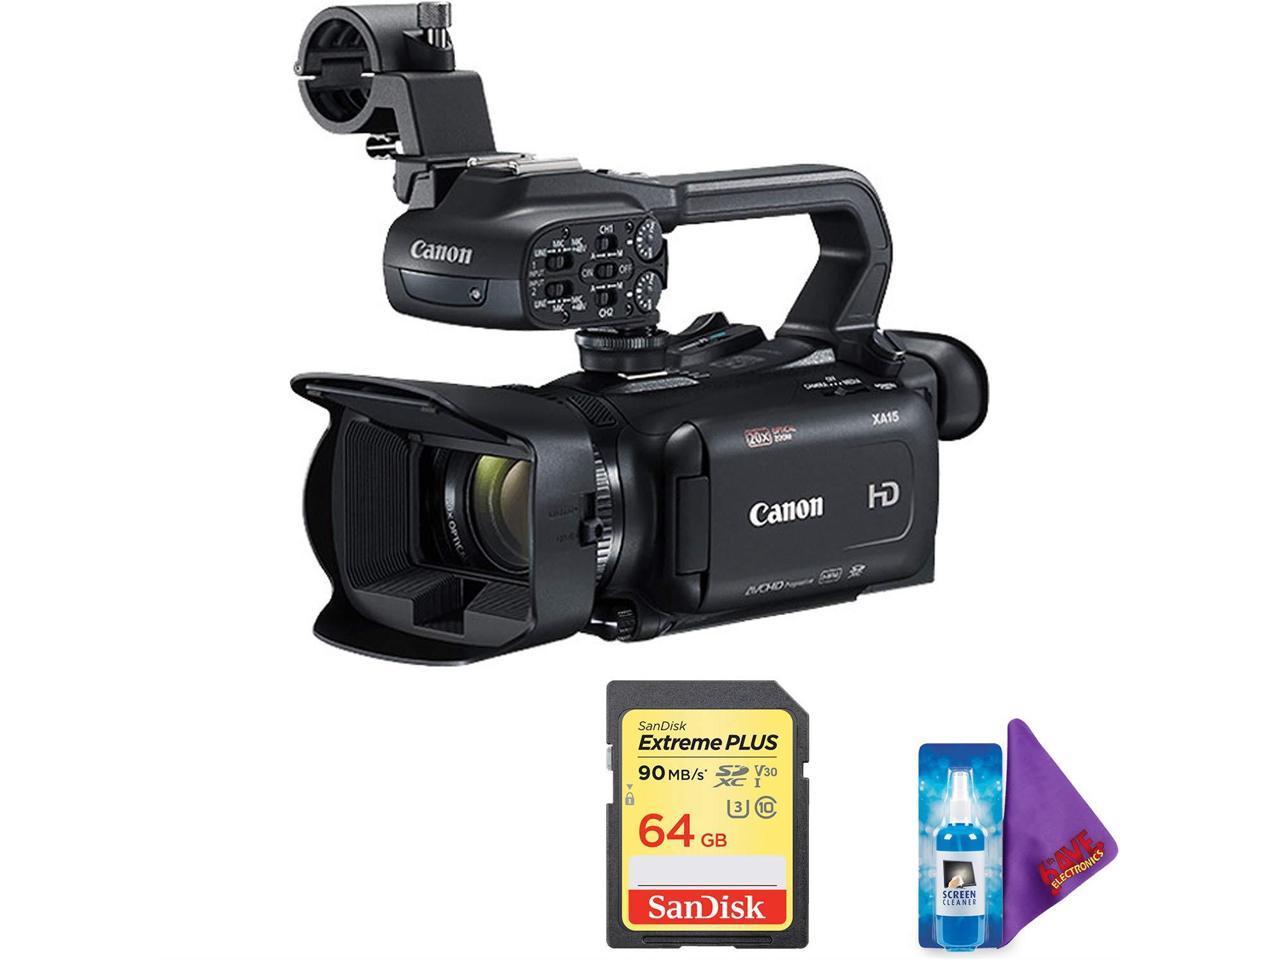 Canon XA15 Compact Full HD Camcorder with SDI, HDMI, and Composite Output + Pro Memory Card